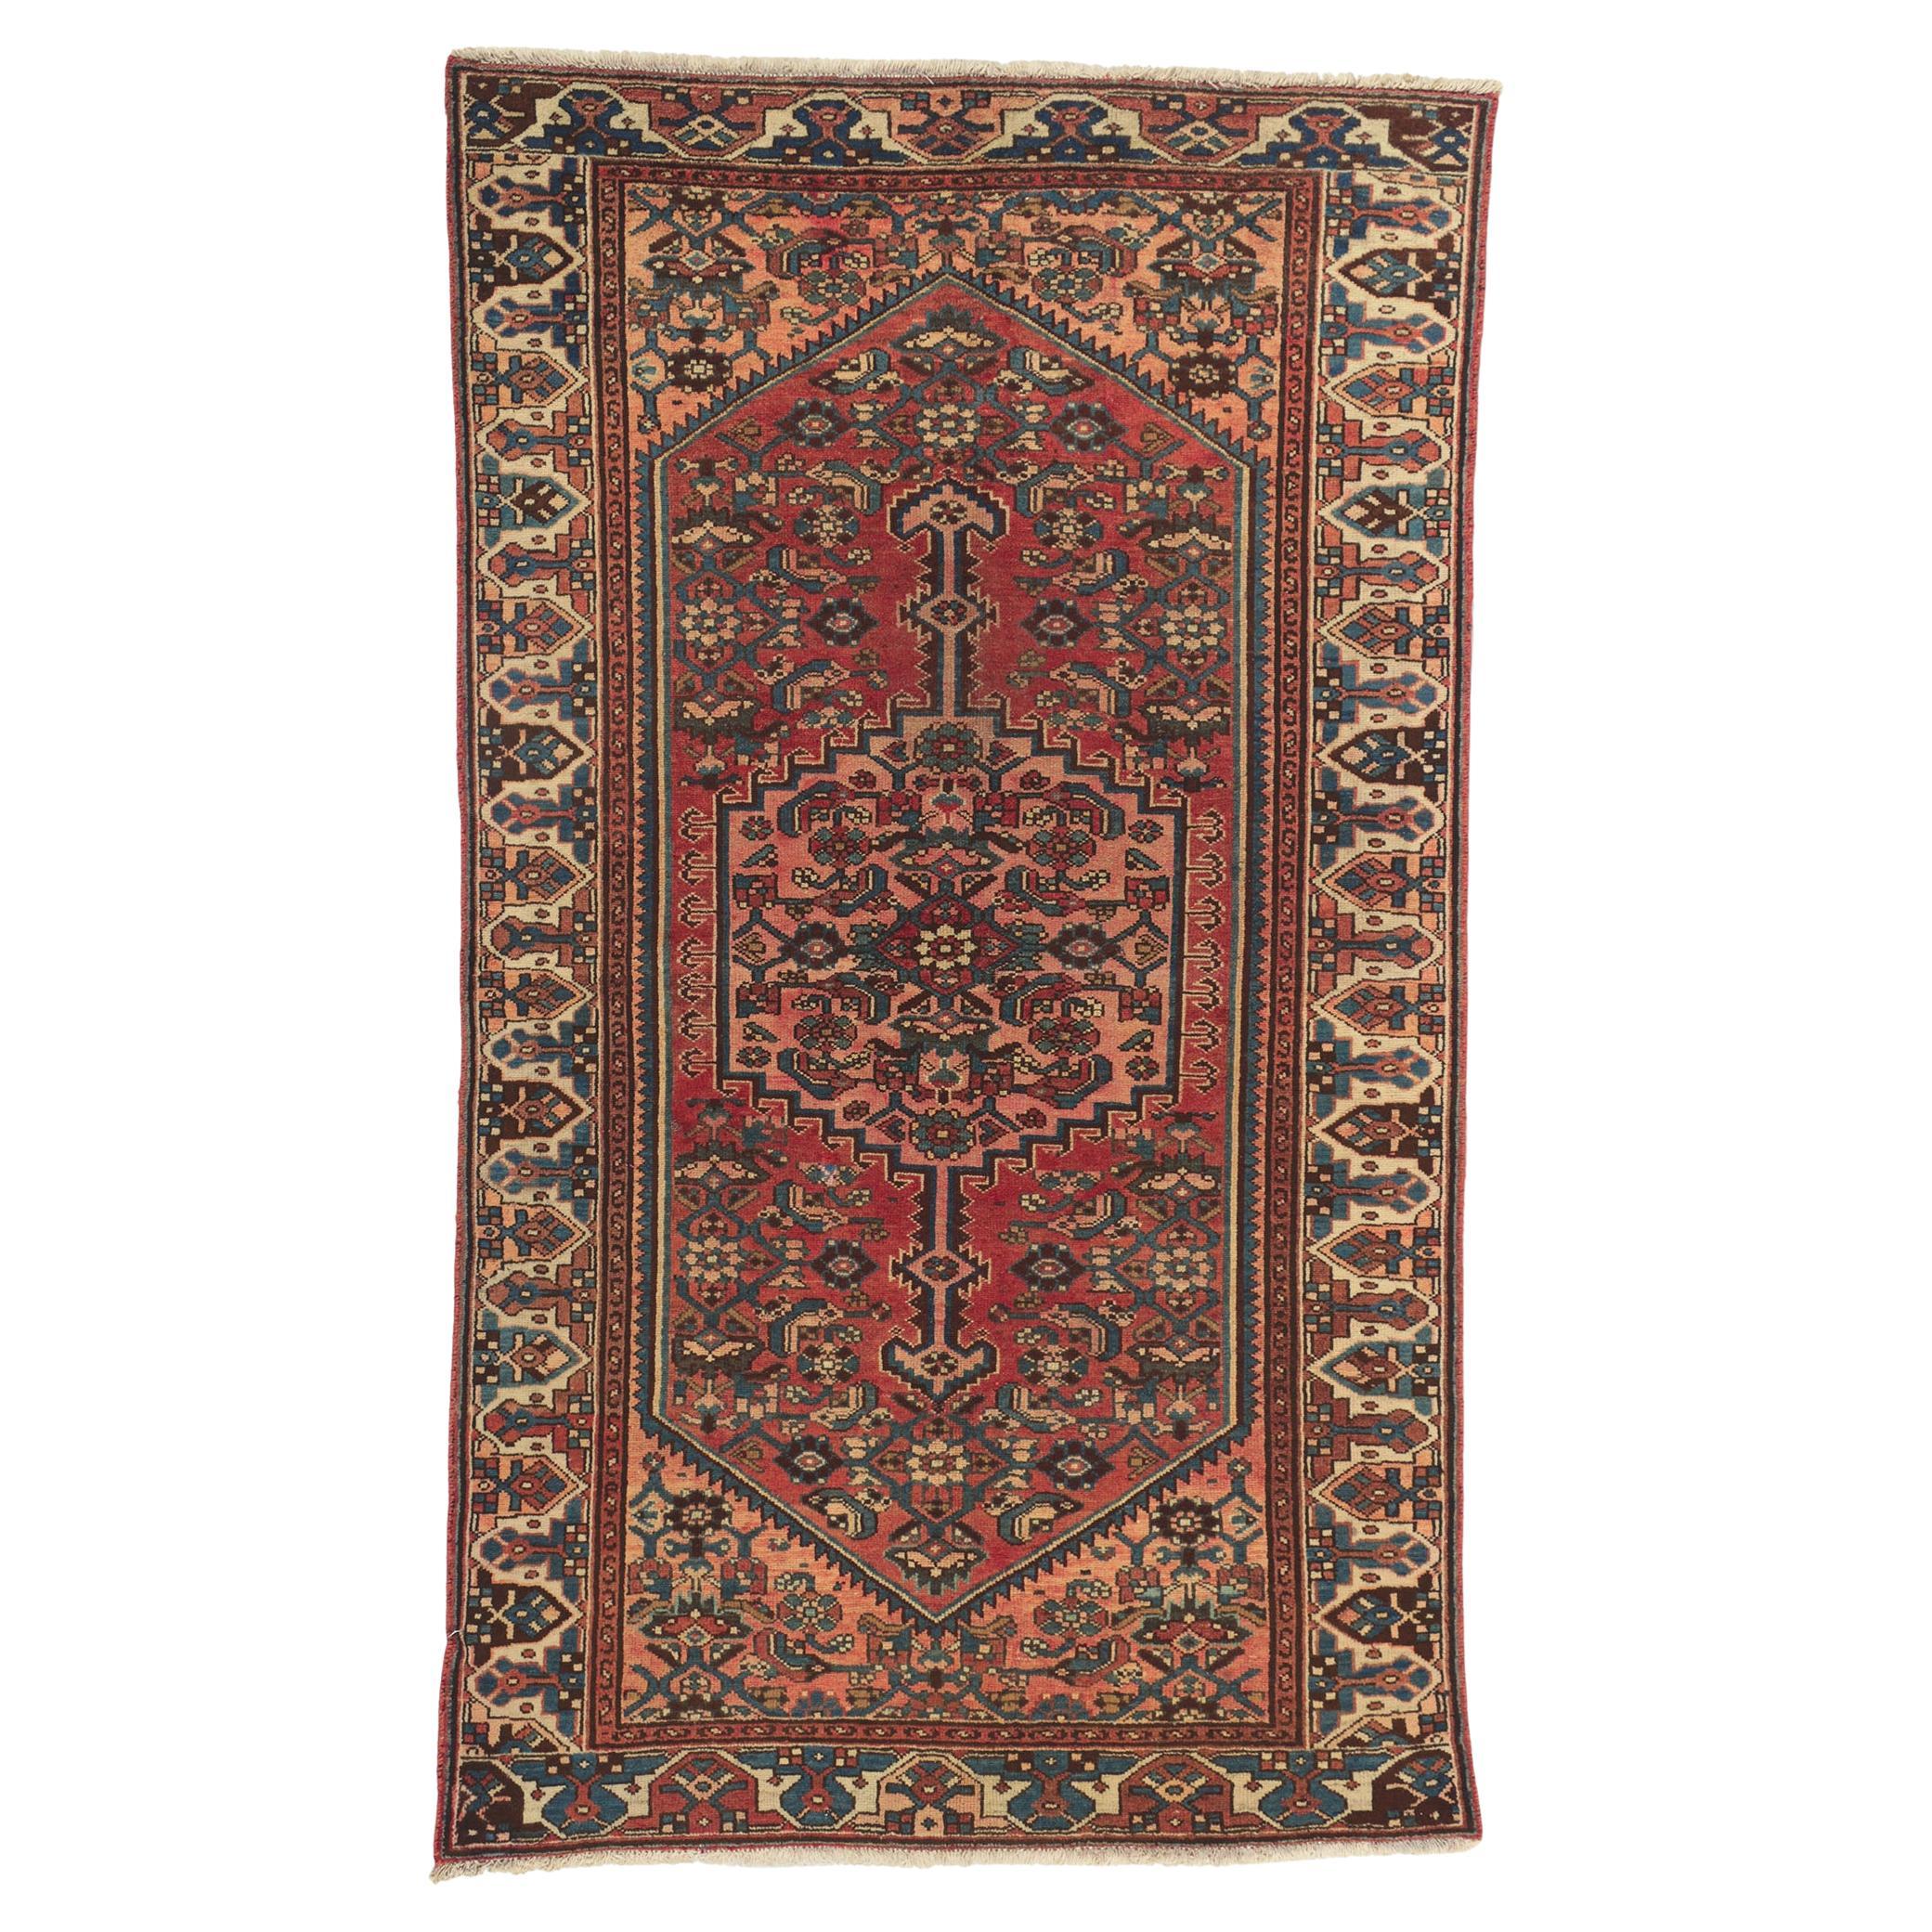 Vintage Persian Hamadan Rug with Rustic Luxe Style